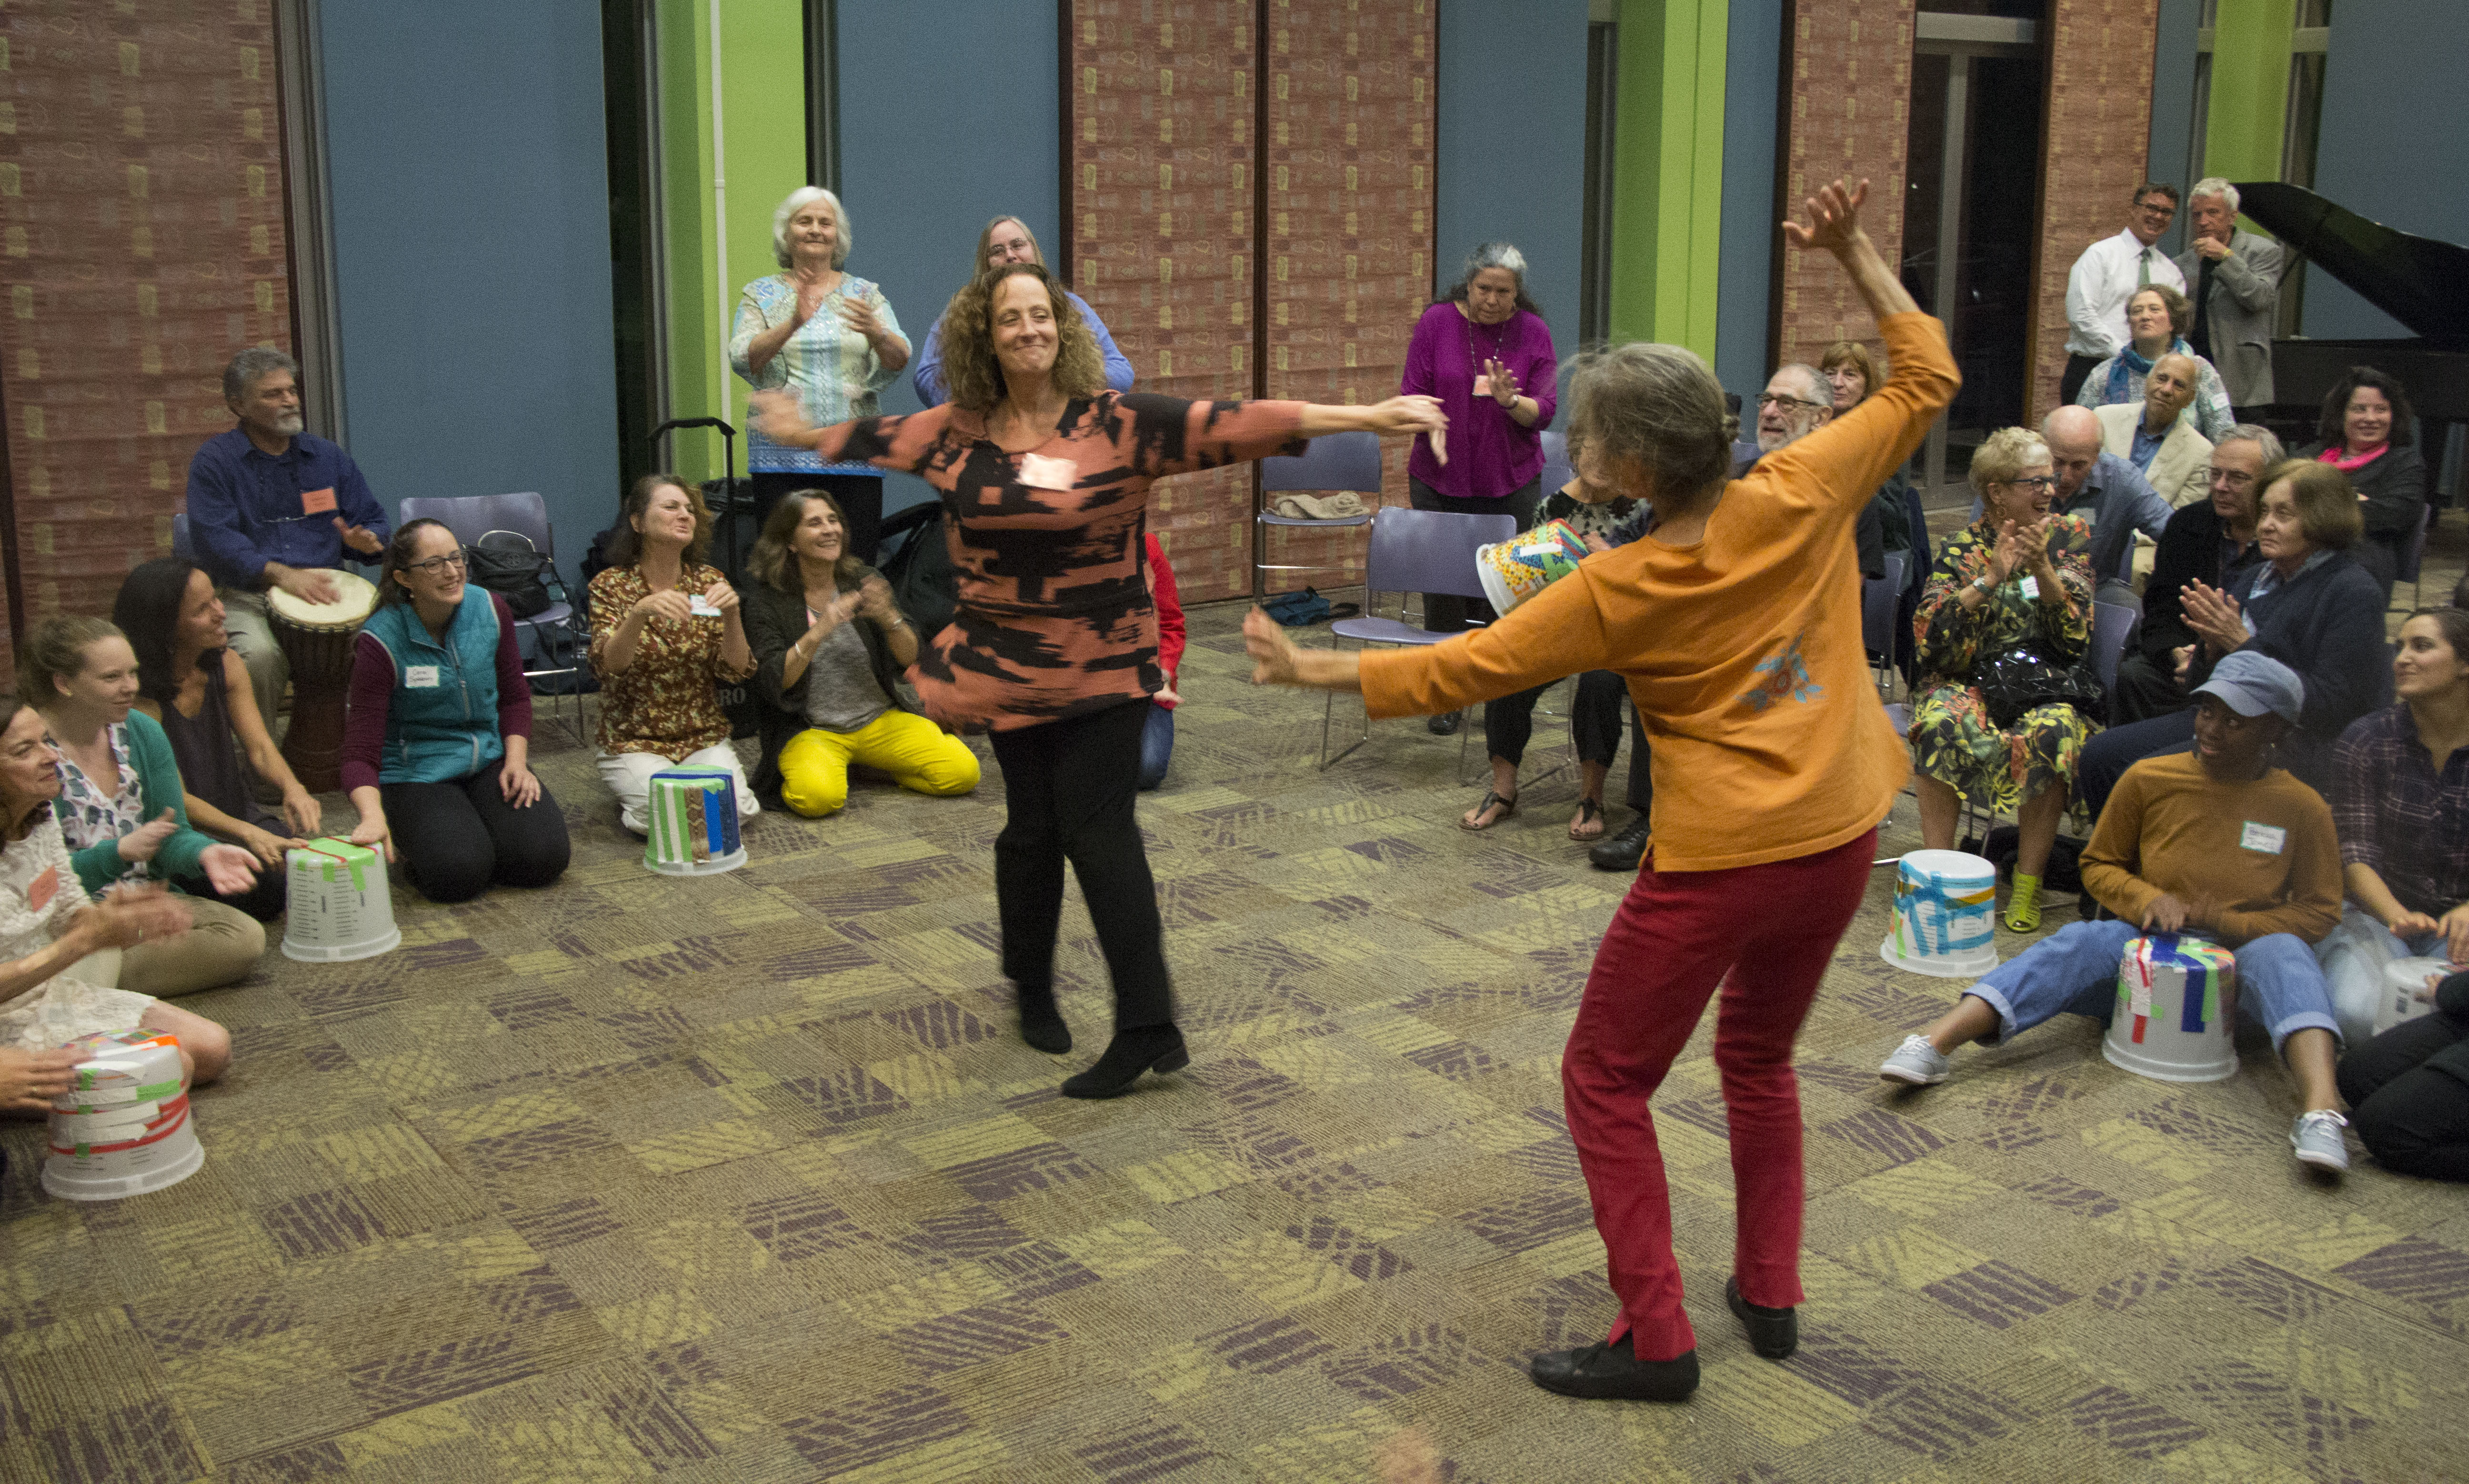 Two women dancing in the middle of a circle of people sitting down. 